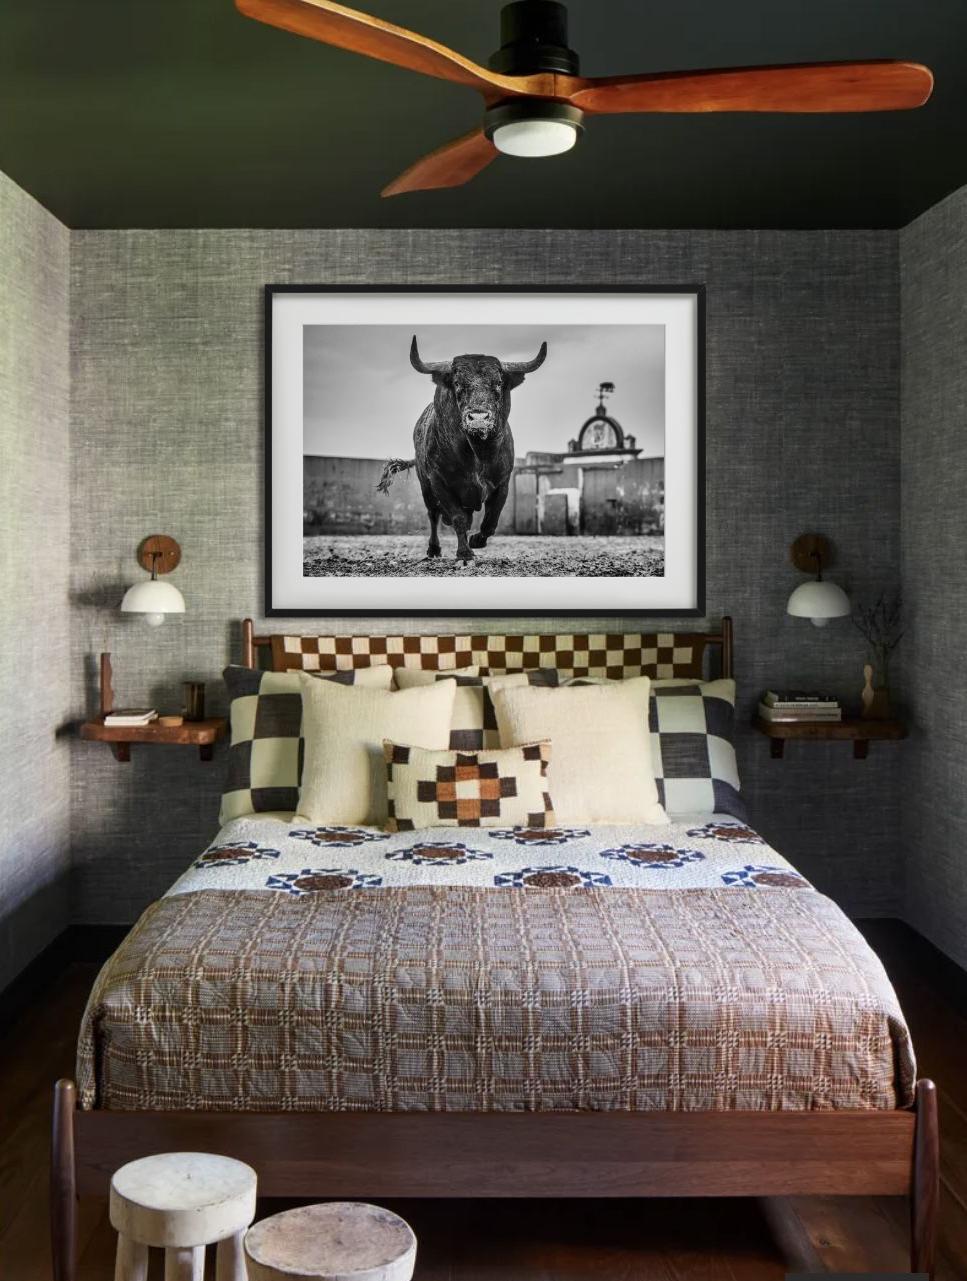 All prints are limited edition. Available in multiple sizes. High-end framing on request.

All prints are done and signed by the artist. The collector receives an additional certificate of authenticity from the gallery.

'Bullish' depicts a bull